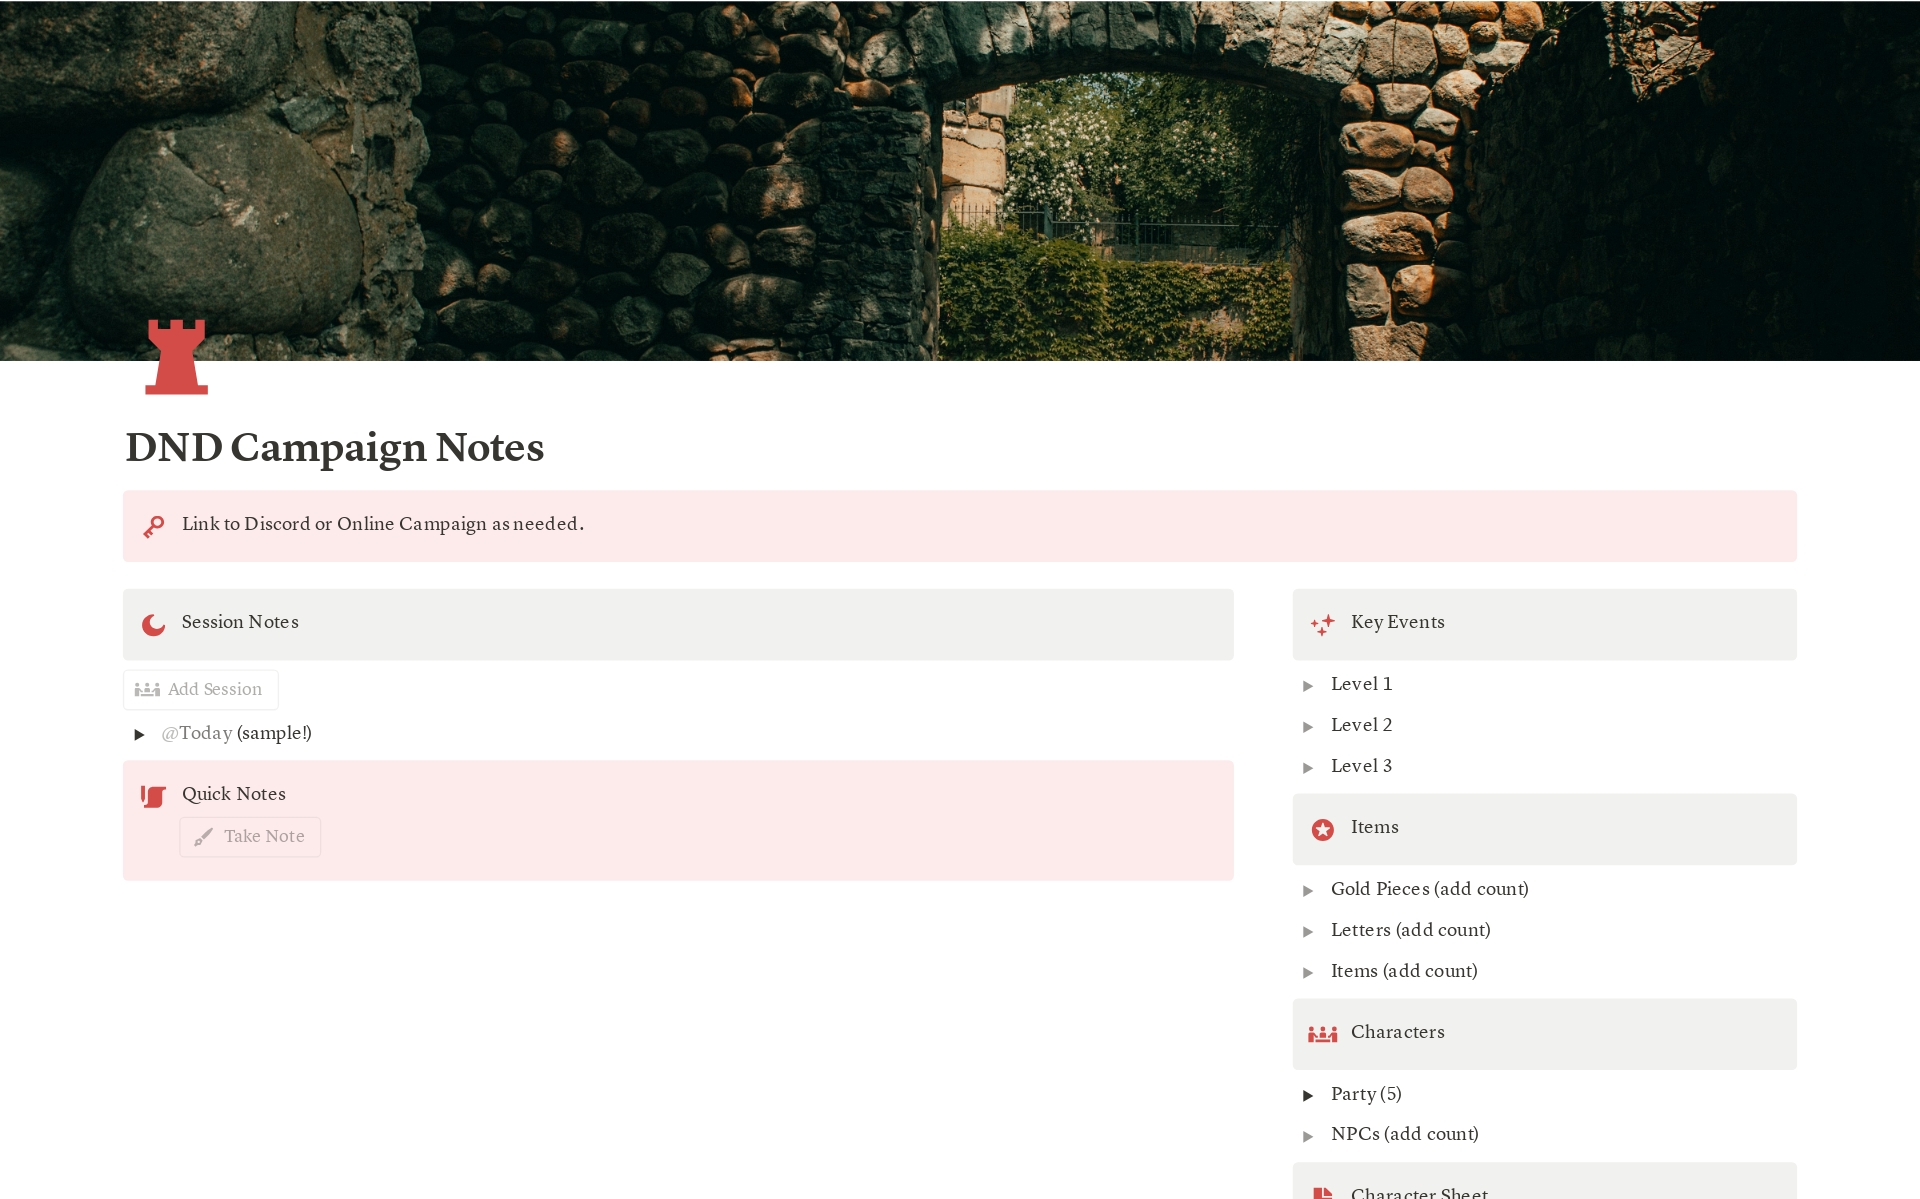 Take notes for your DND Campaign Sessions, keep track of key events, items collected, and party members. As you take notes, you can auto-generate your adventure summary with AI. 